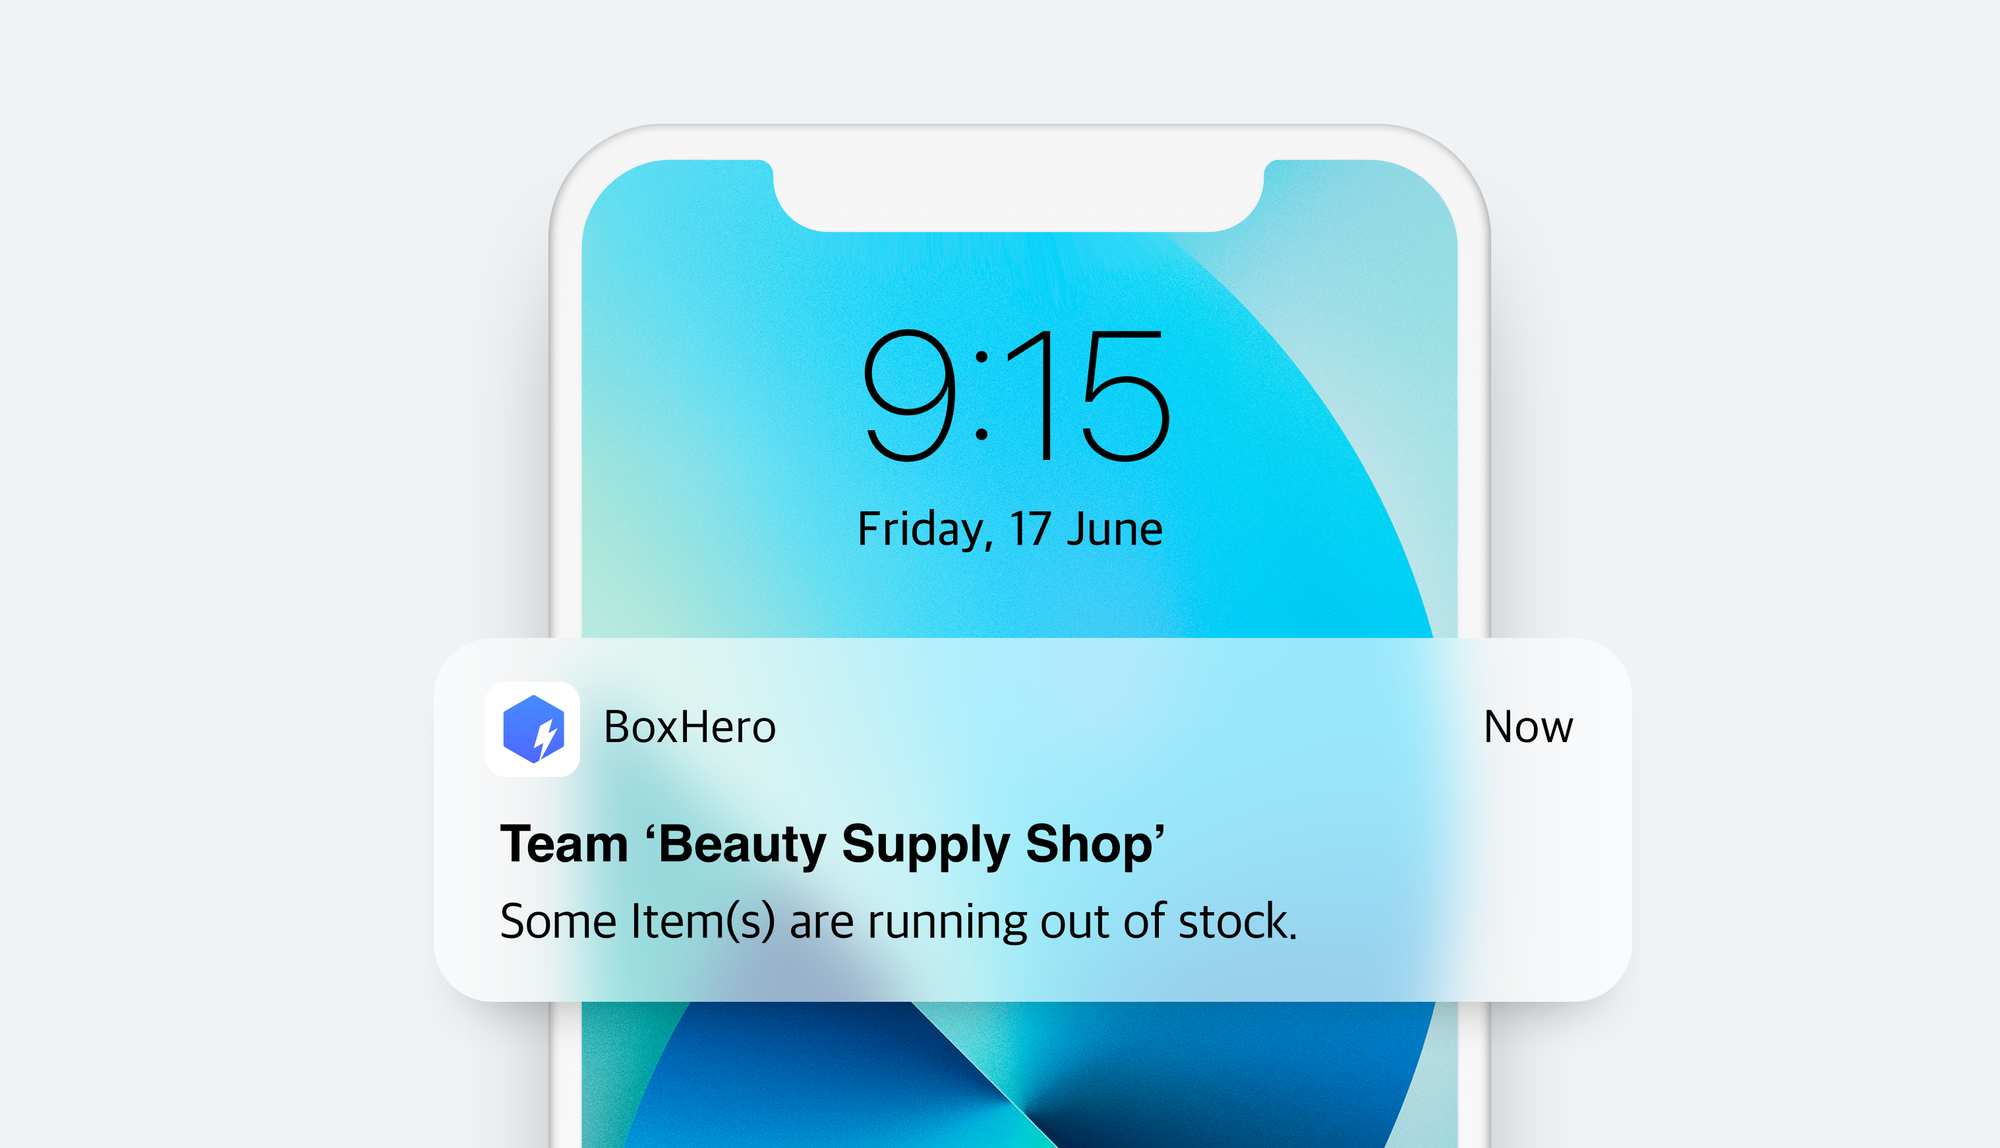 Mobile push notifications about low inventory amount